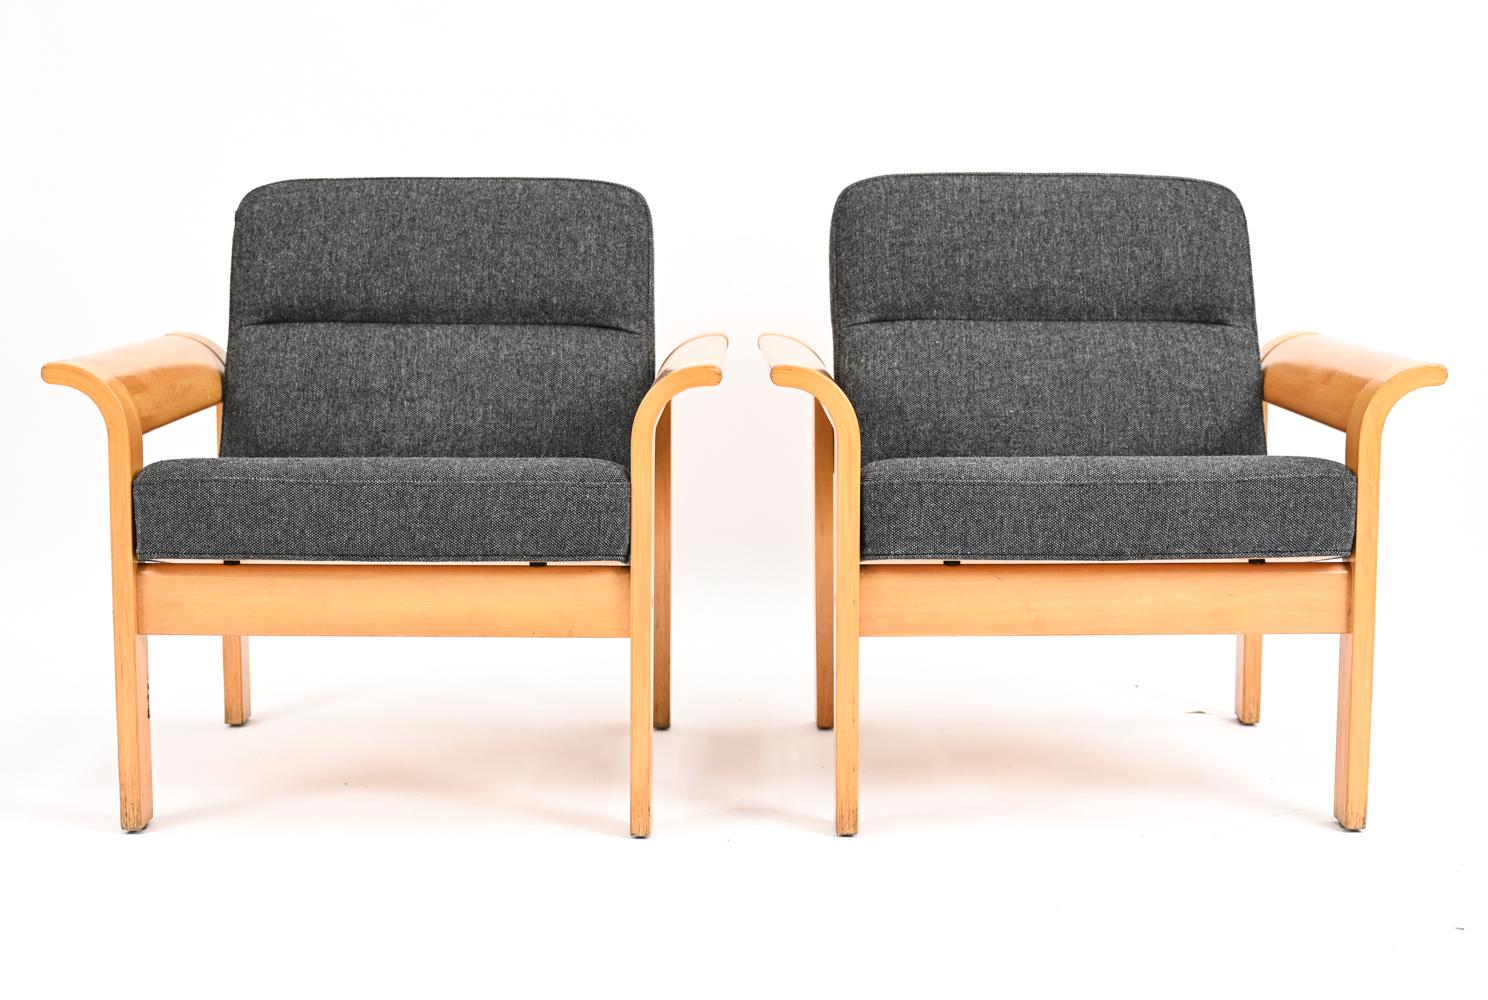 A pair of Danish mid-century lounge chairs designed by Rud Thygesen for Magnus Olesen / Botium, marked with labels underneath. Featuring beechwood frames with flared armrests and gray wool upholstery. c. 1970's.